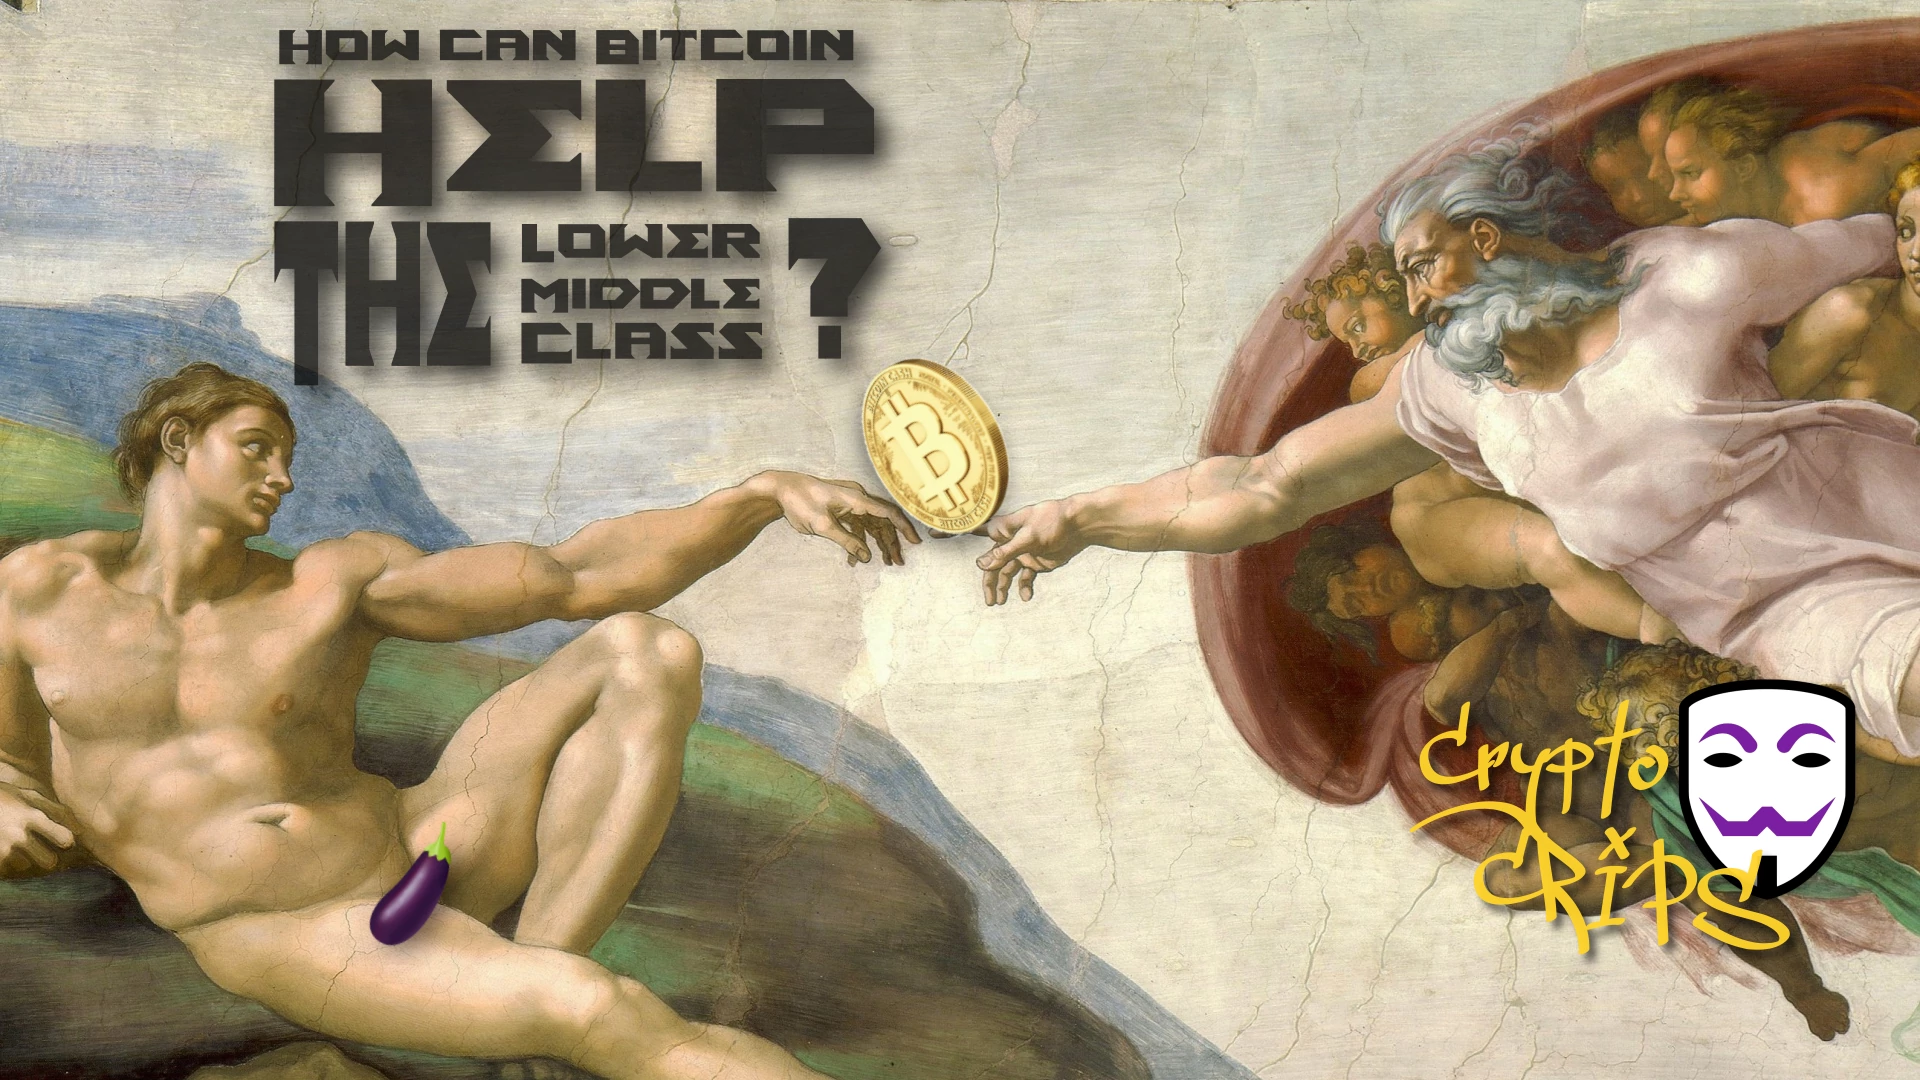 How can Bitcoins help the Lower middle class?